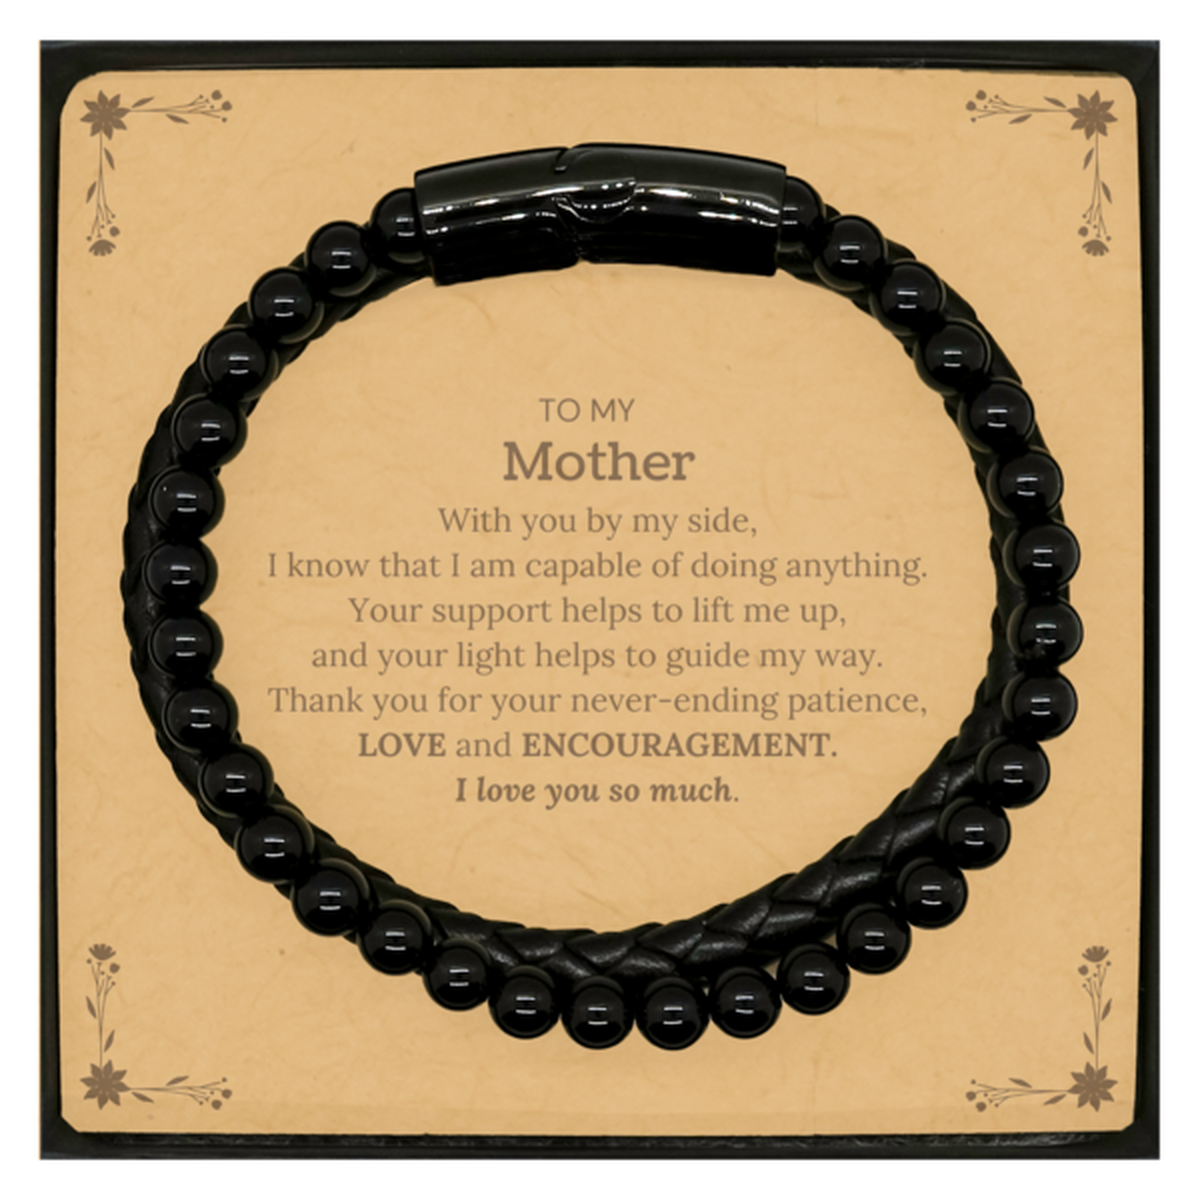 Appreciation Mother Stone Leather Bracelets Gifts, To My Mother Birthday Christmas Wedding Keepsake Gifts for Mother With you by my side, I know that I am capable of doing anything. I love you so much